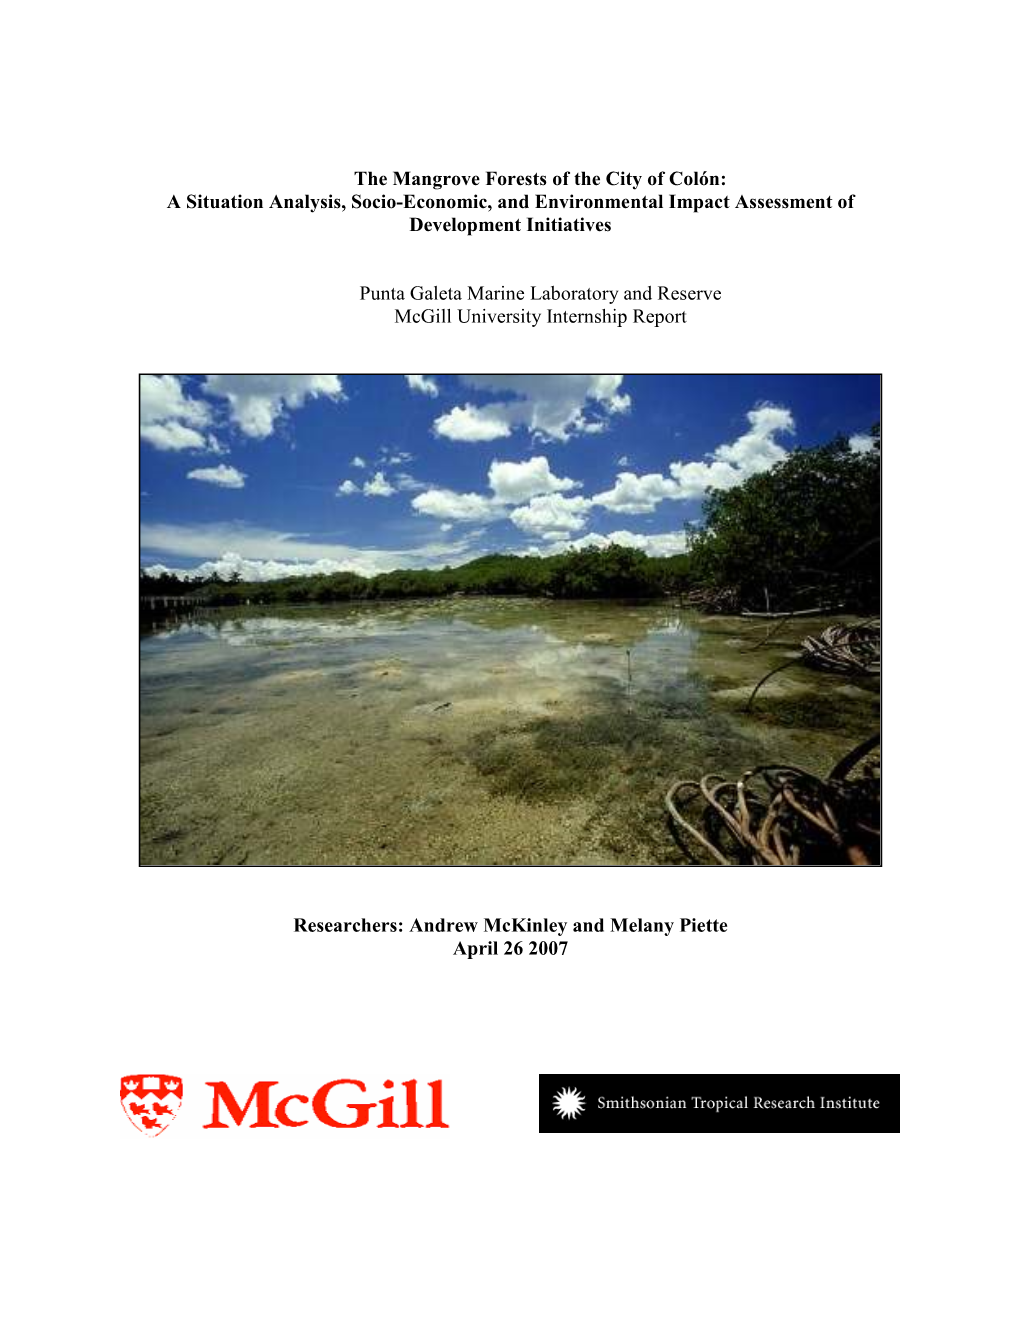 The Mangrove Forests of the City of Colón: a Situation Analysis, Socio-Economic, and Environmental Impact Assessment of Development Initiatives